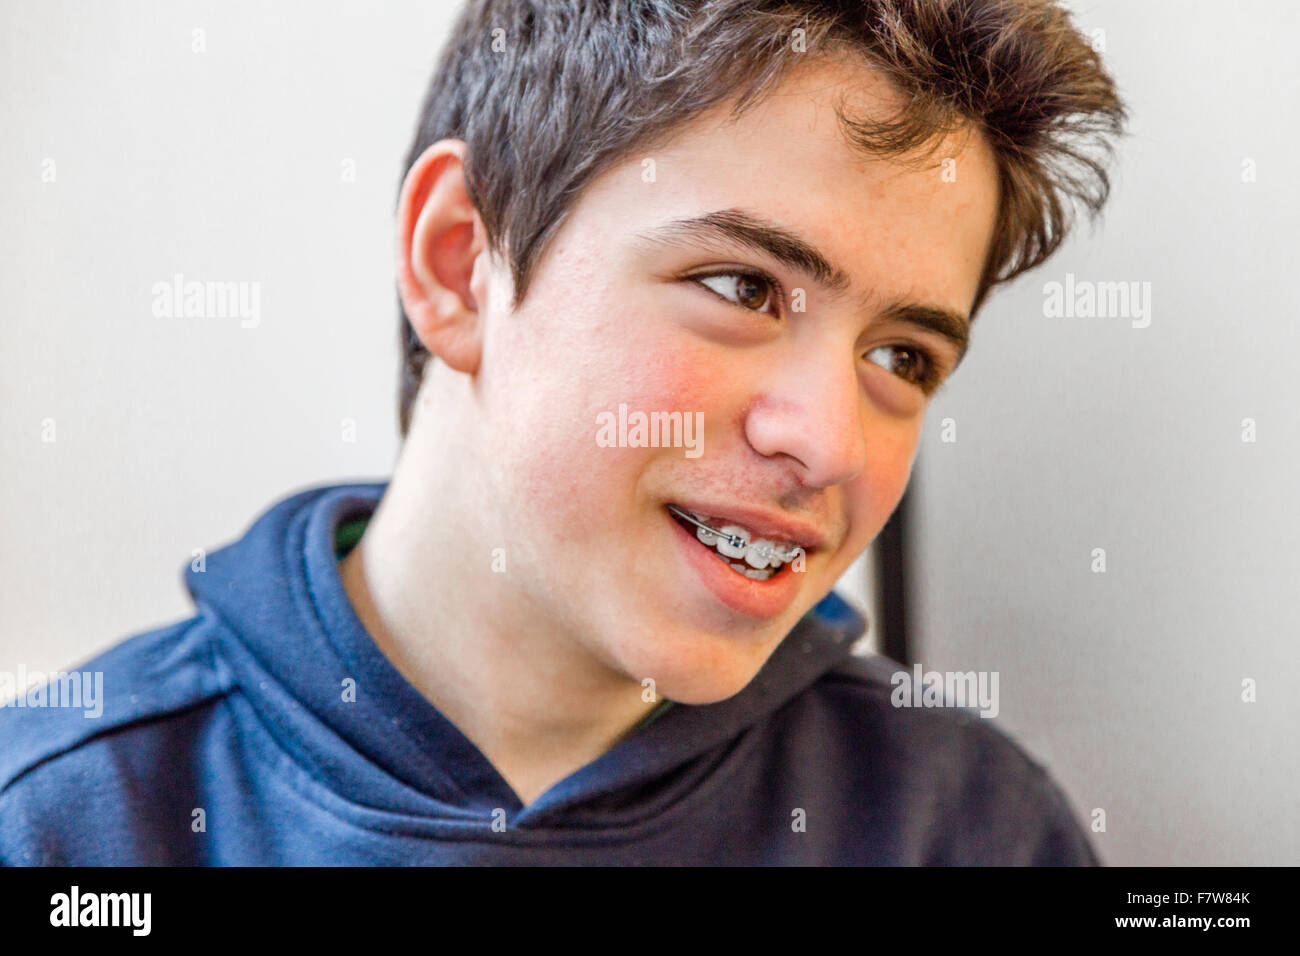 caucasian boy happy and smiling with braces on teeth, boy looking to his left Stock Photo